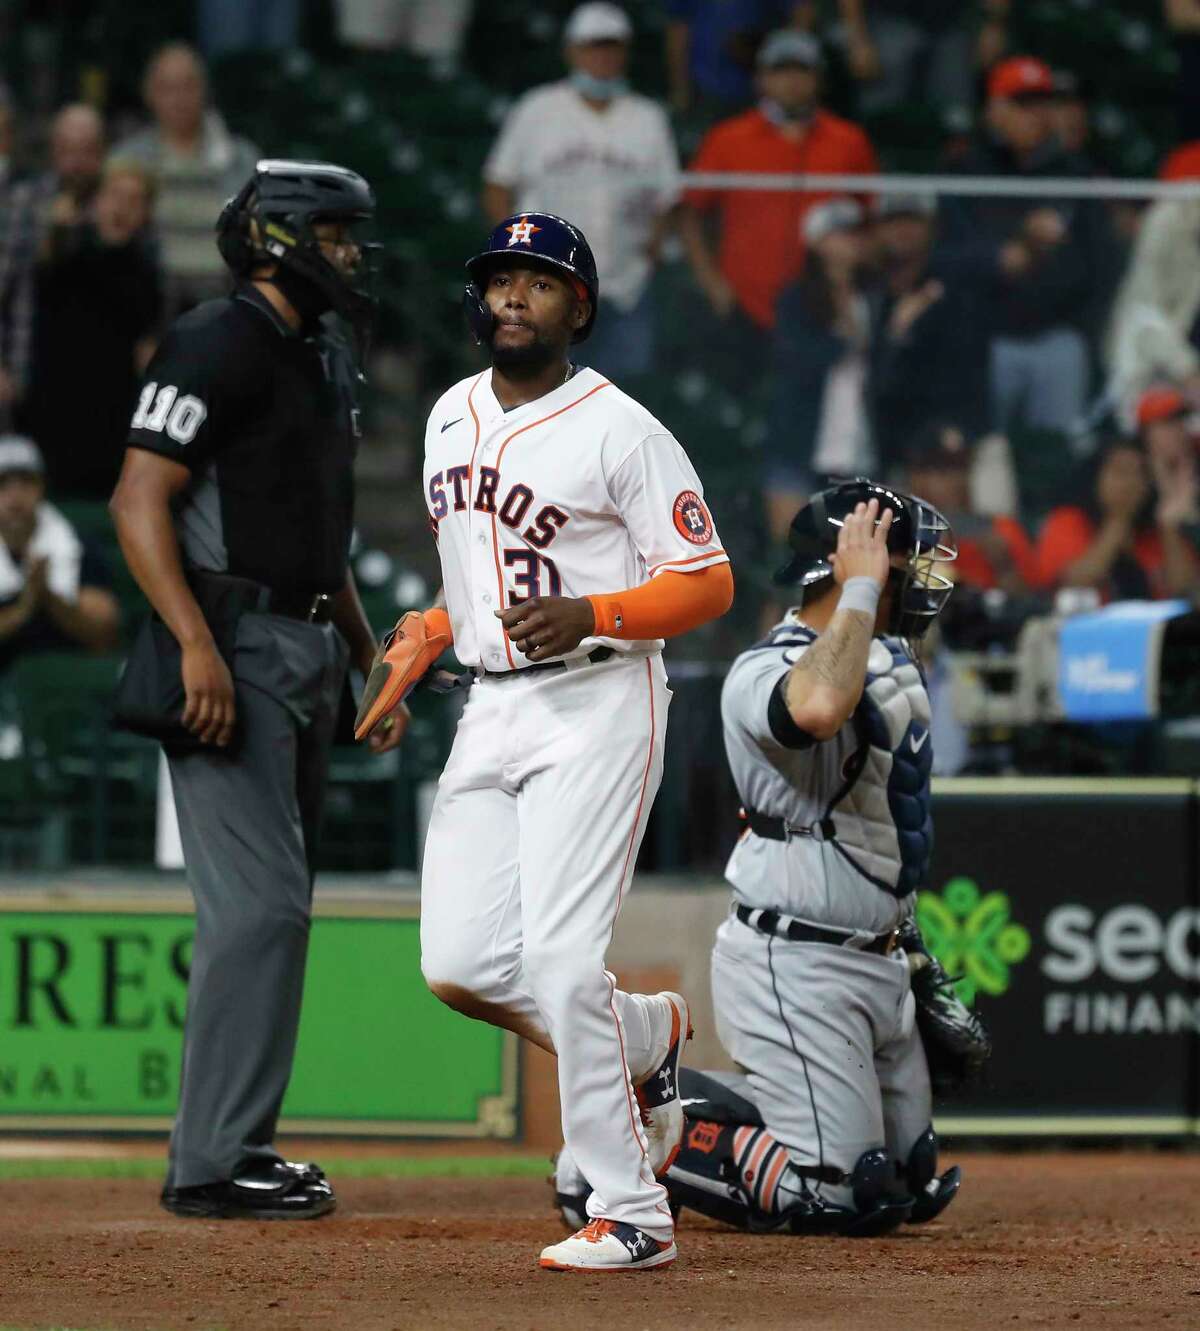 Houston Astros Ronnie Dawson (31) scores a run as Yuli Gurriel was walked with the bases loaded during the ninth inning of an MLB baseball game at Minute Maid Park, in Houston, Wednesday, April 14, 2021.